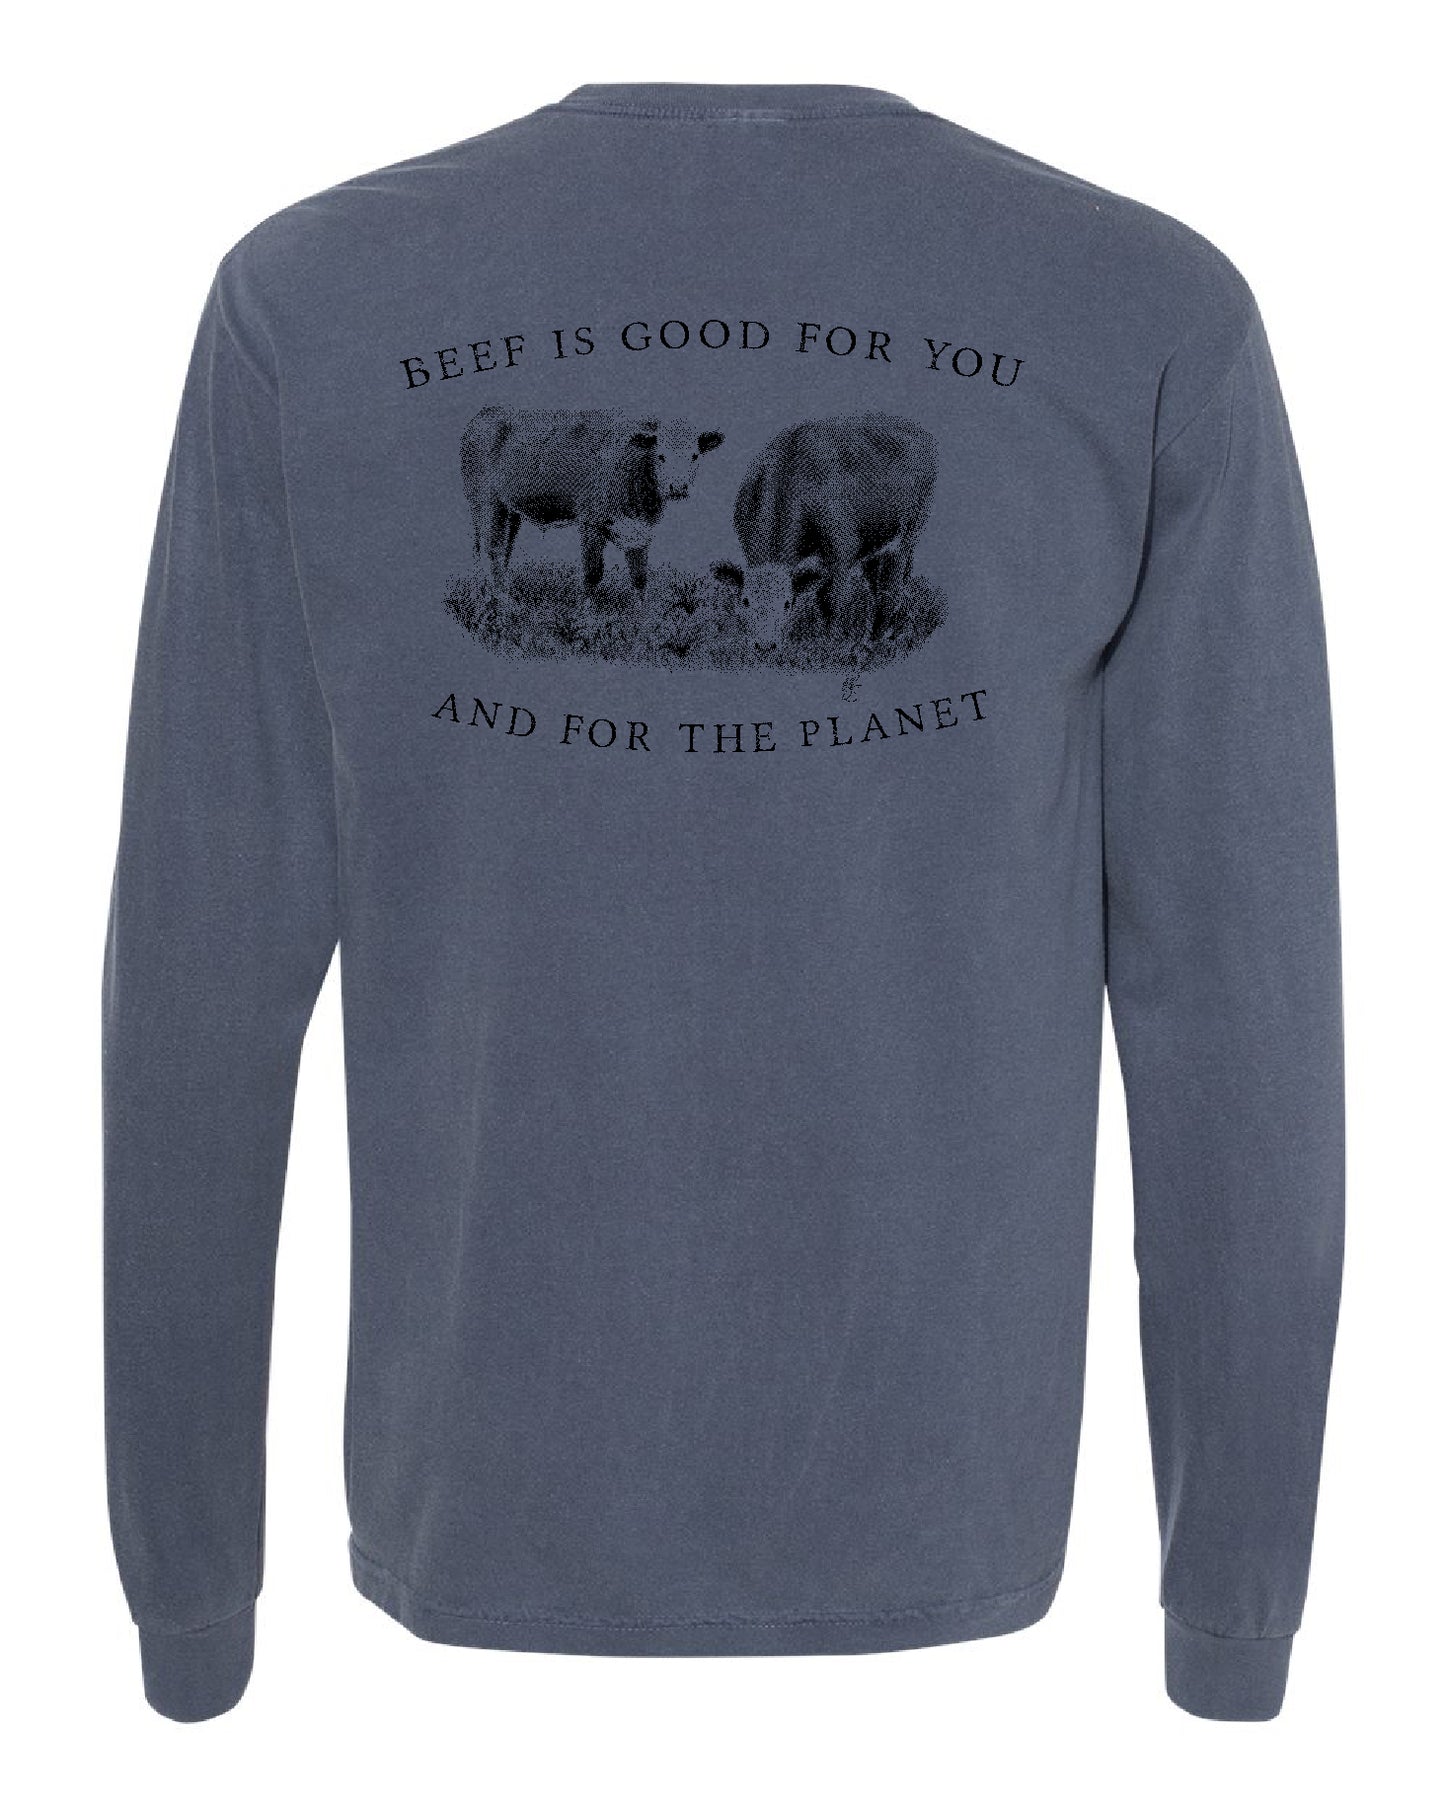 Beef is Good Long Sleeve (multiple colors available)